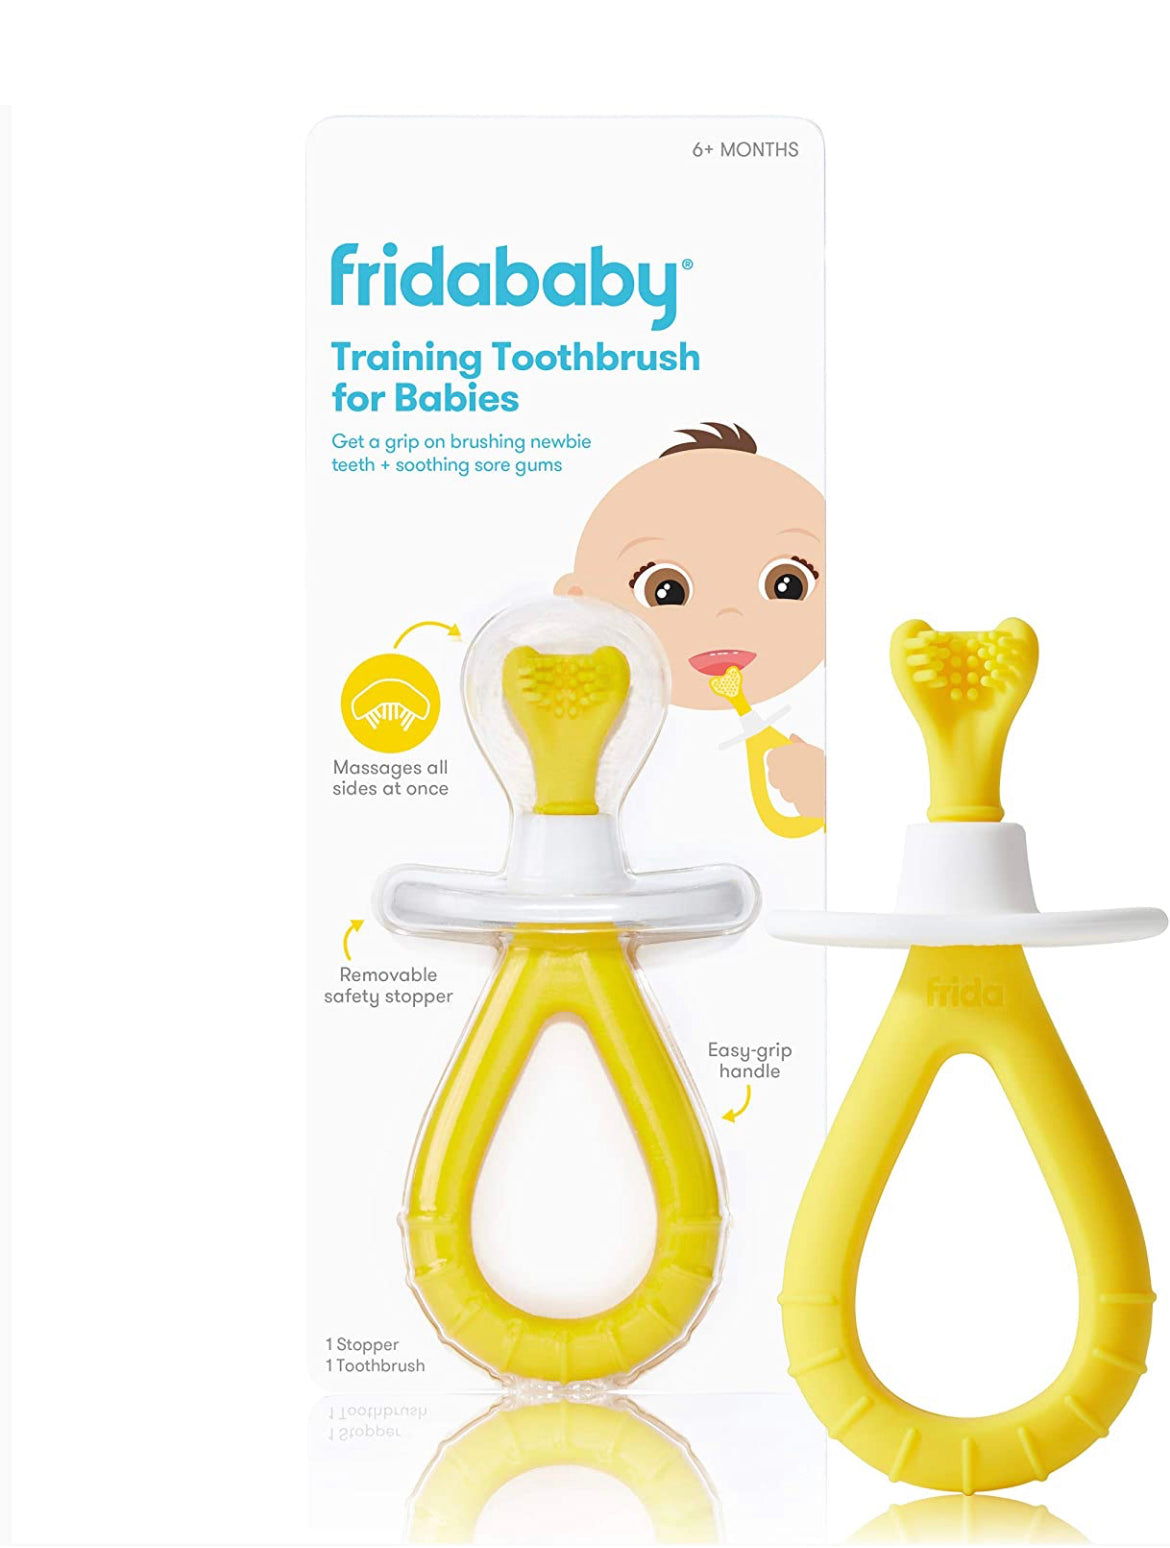 Training Toothbrush for Babies with Soft Silicone Bristles by Frida Baby.